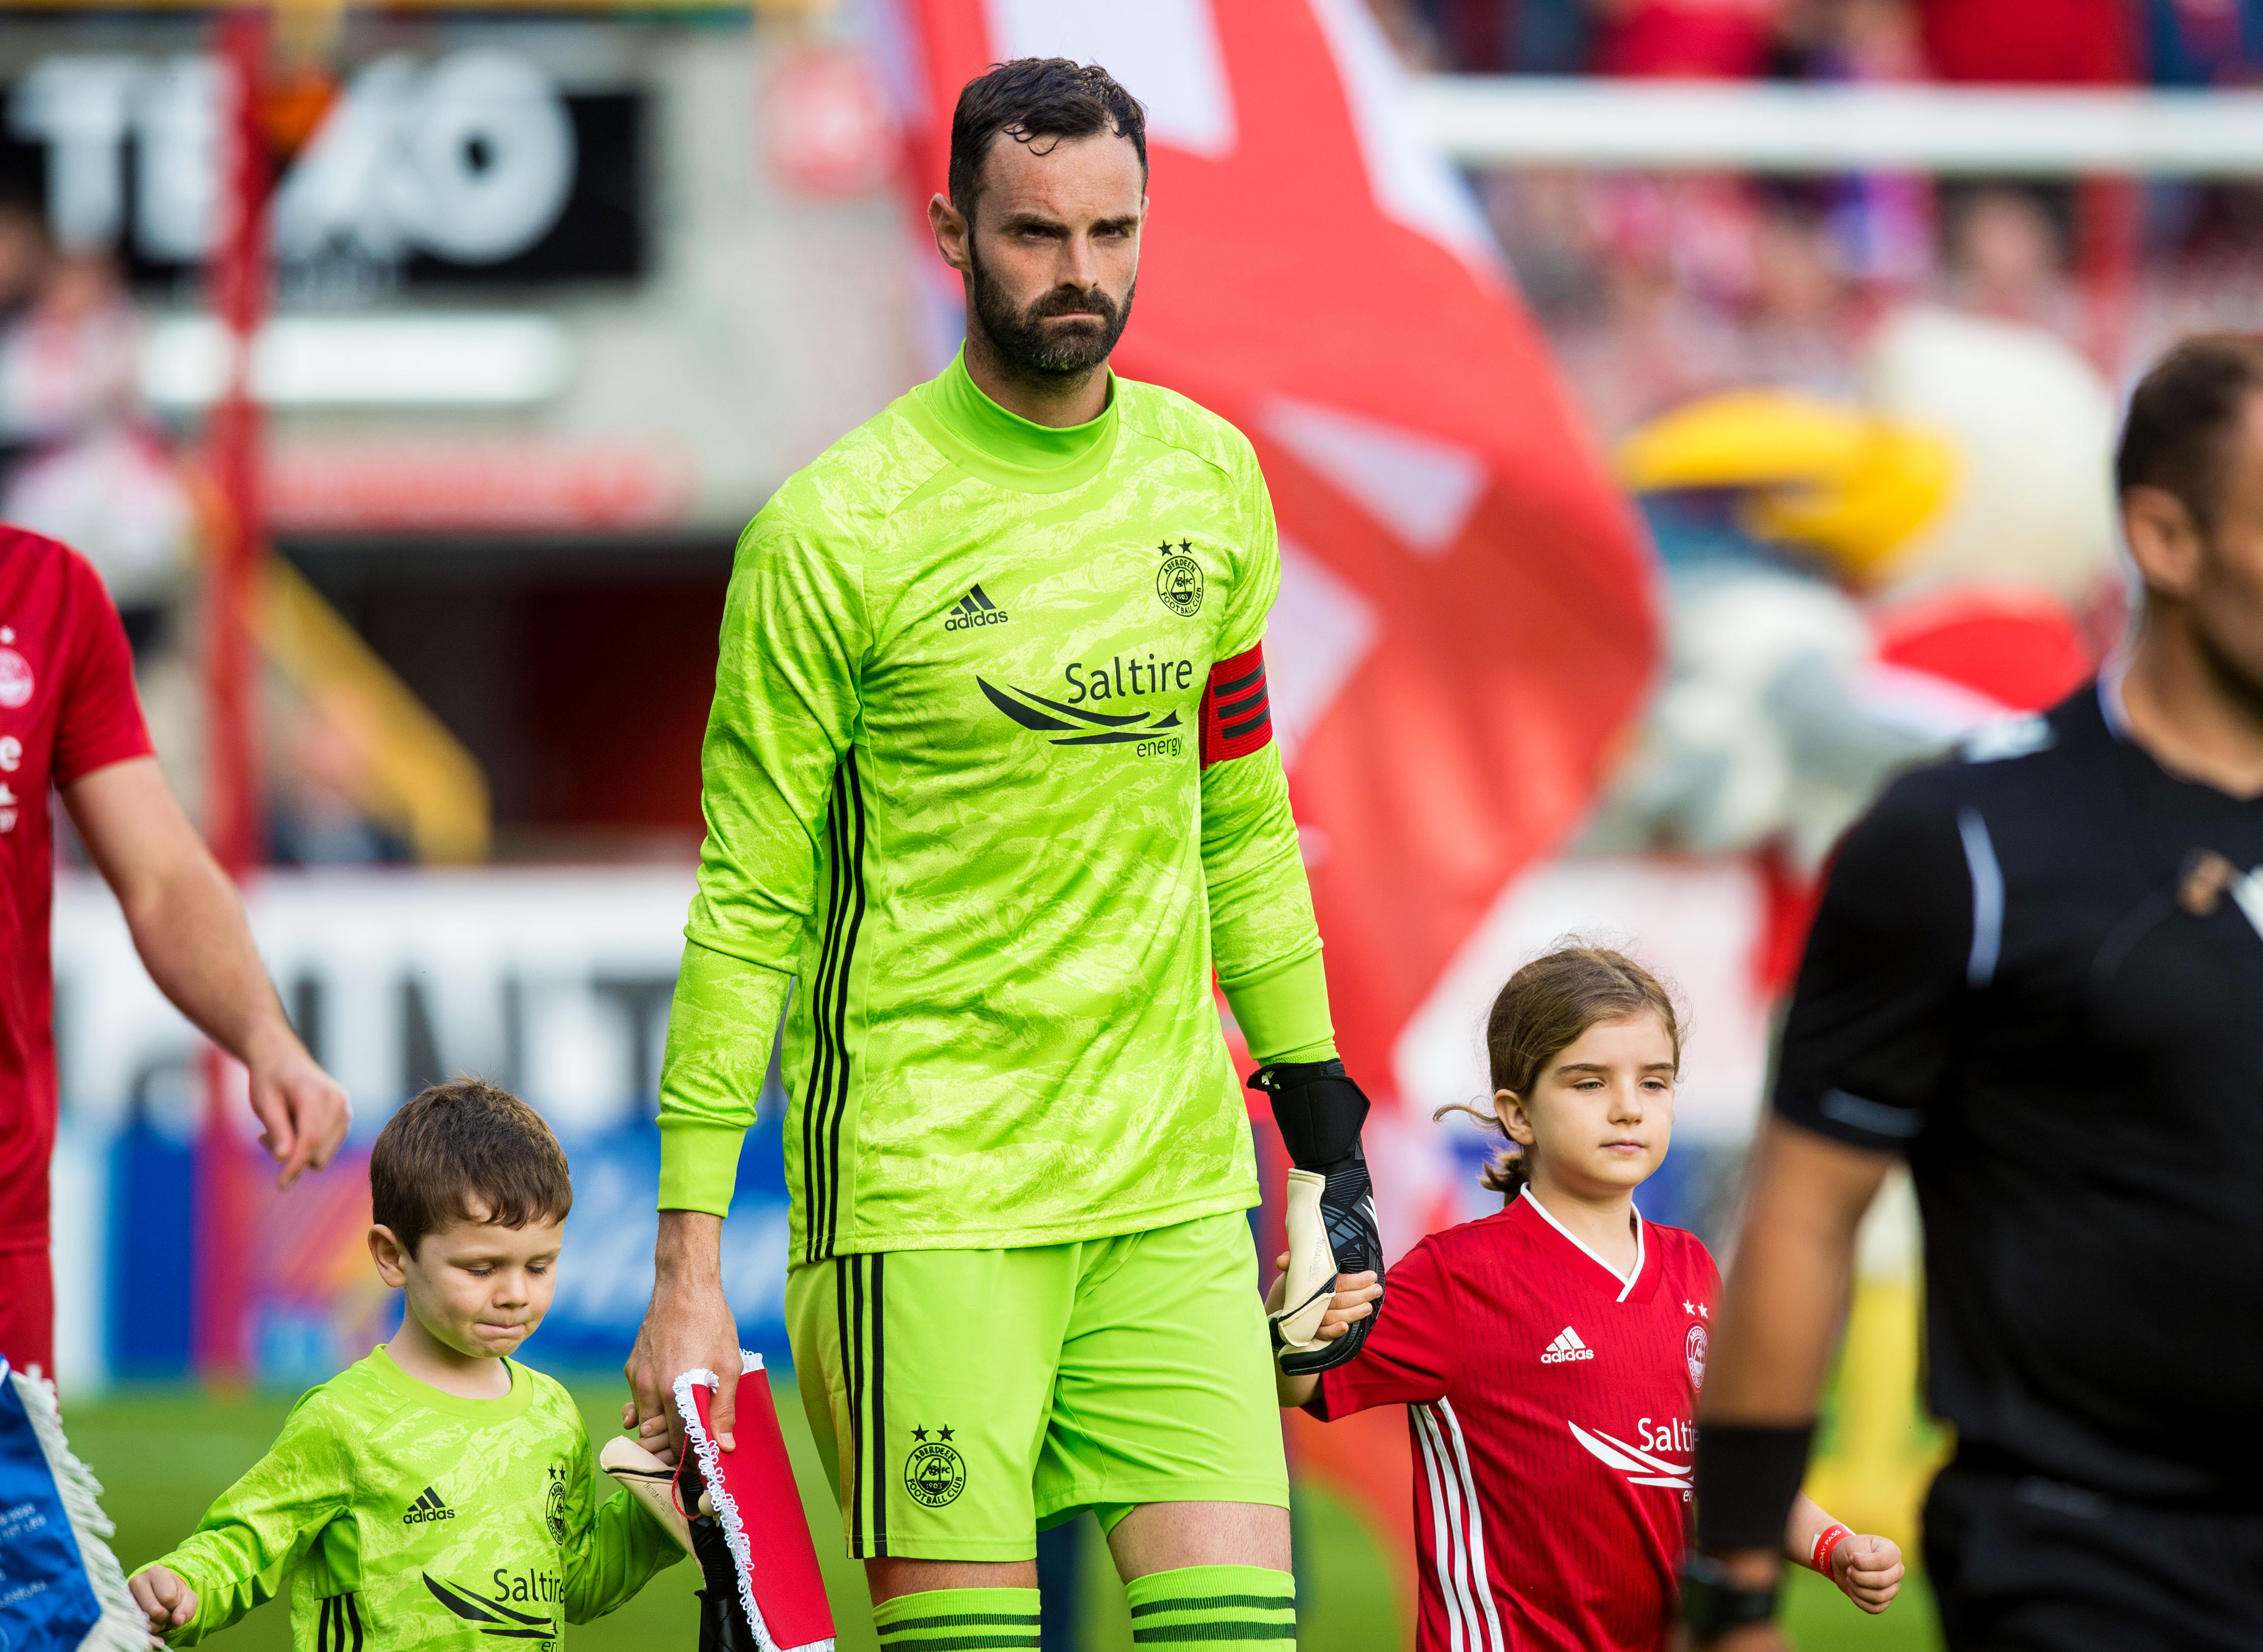 Aberdeen captain Joe Lewis leads his team out onto the field.